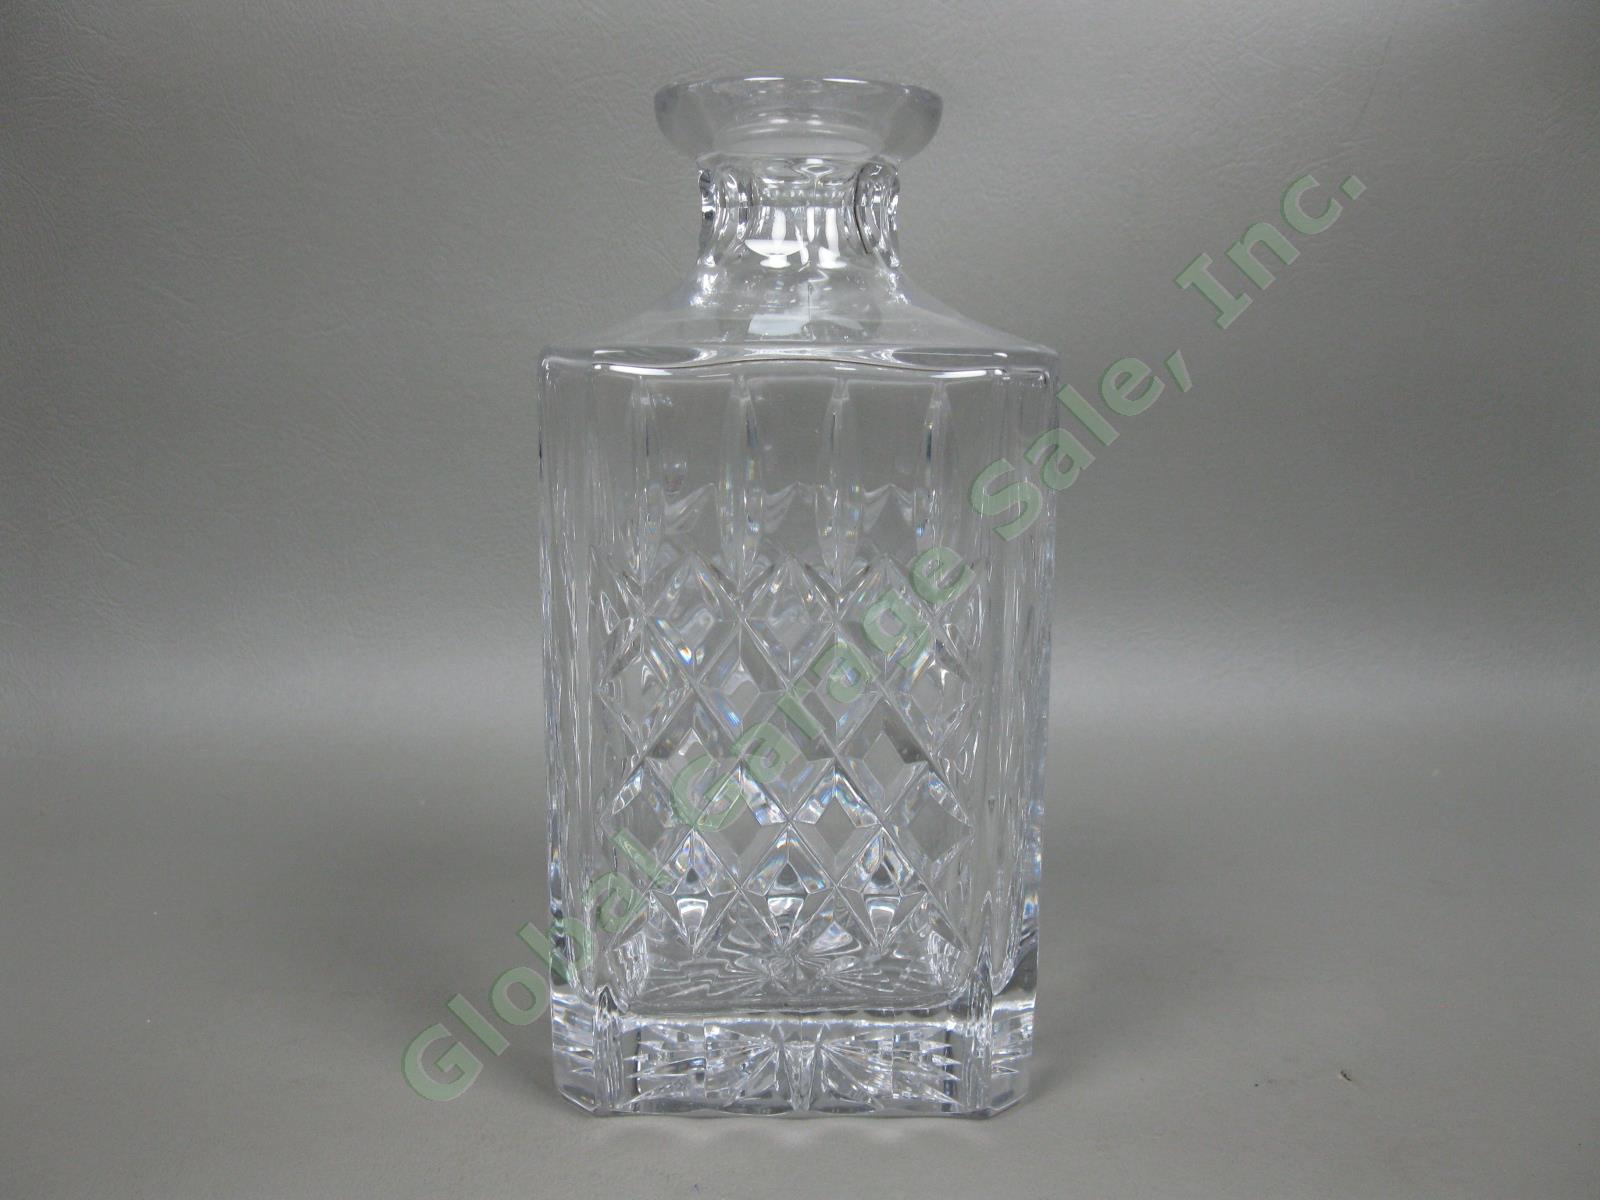 Vintage Waterford 10.75" Cut Crystal Rectangular Glass Liquor Decanter & Stopper 2